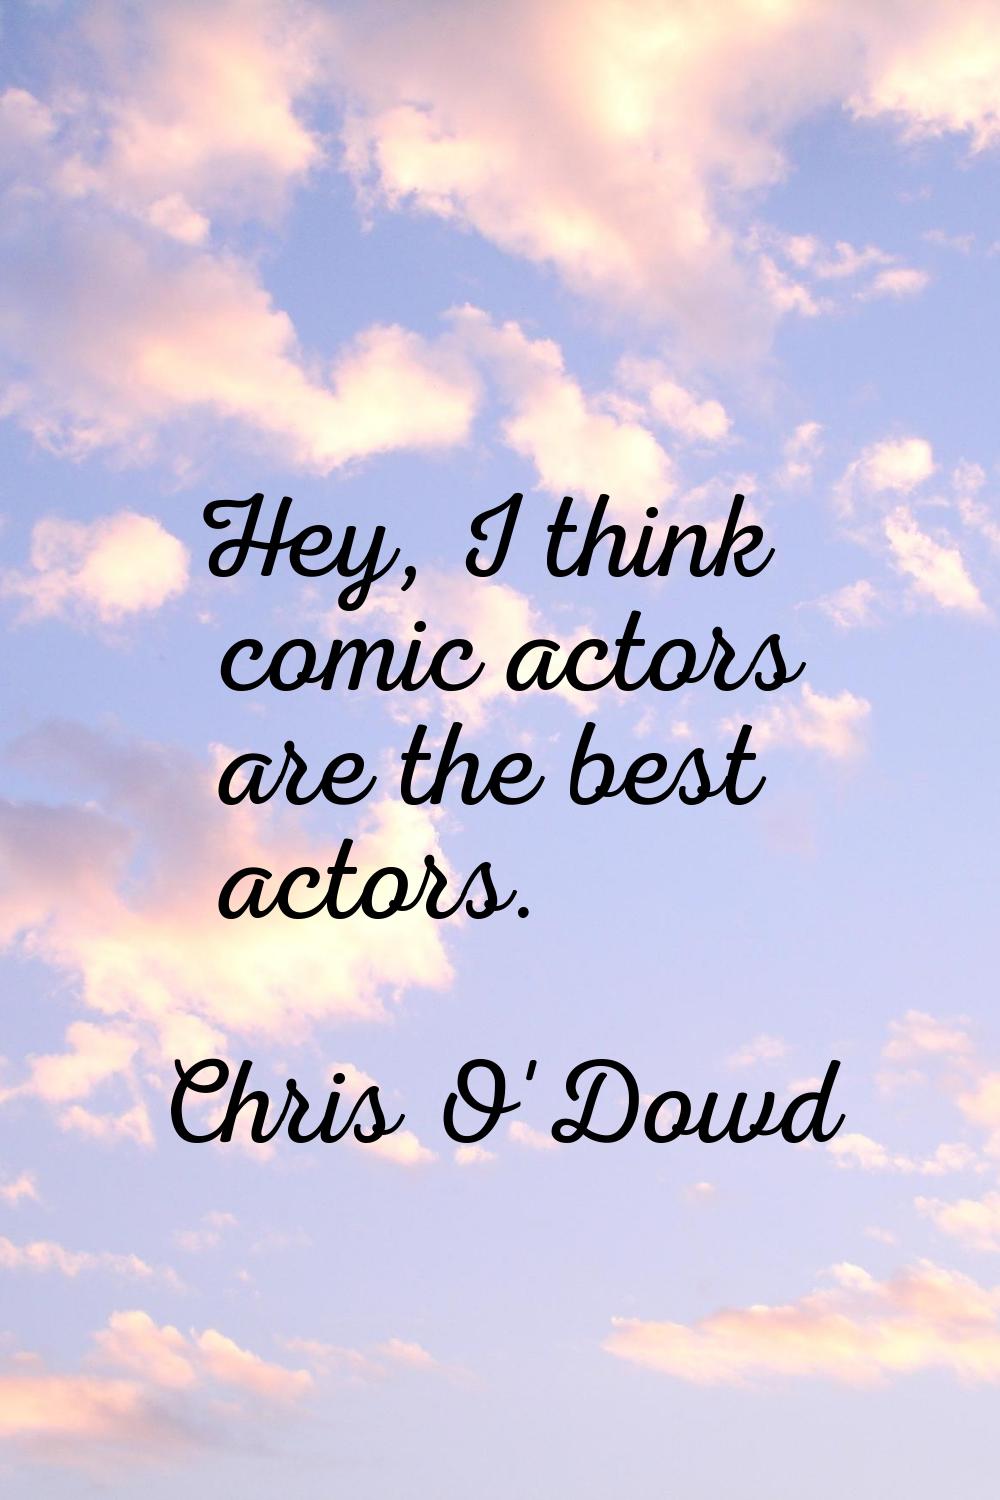 Hey, I think comic actors are the best actors.